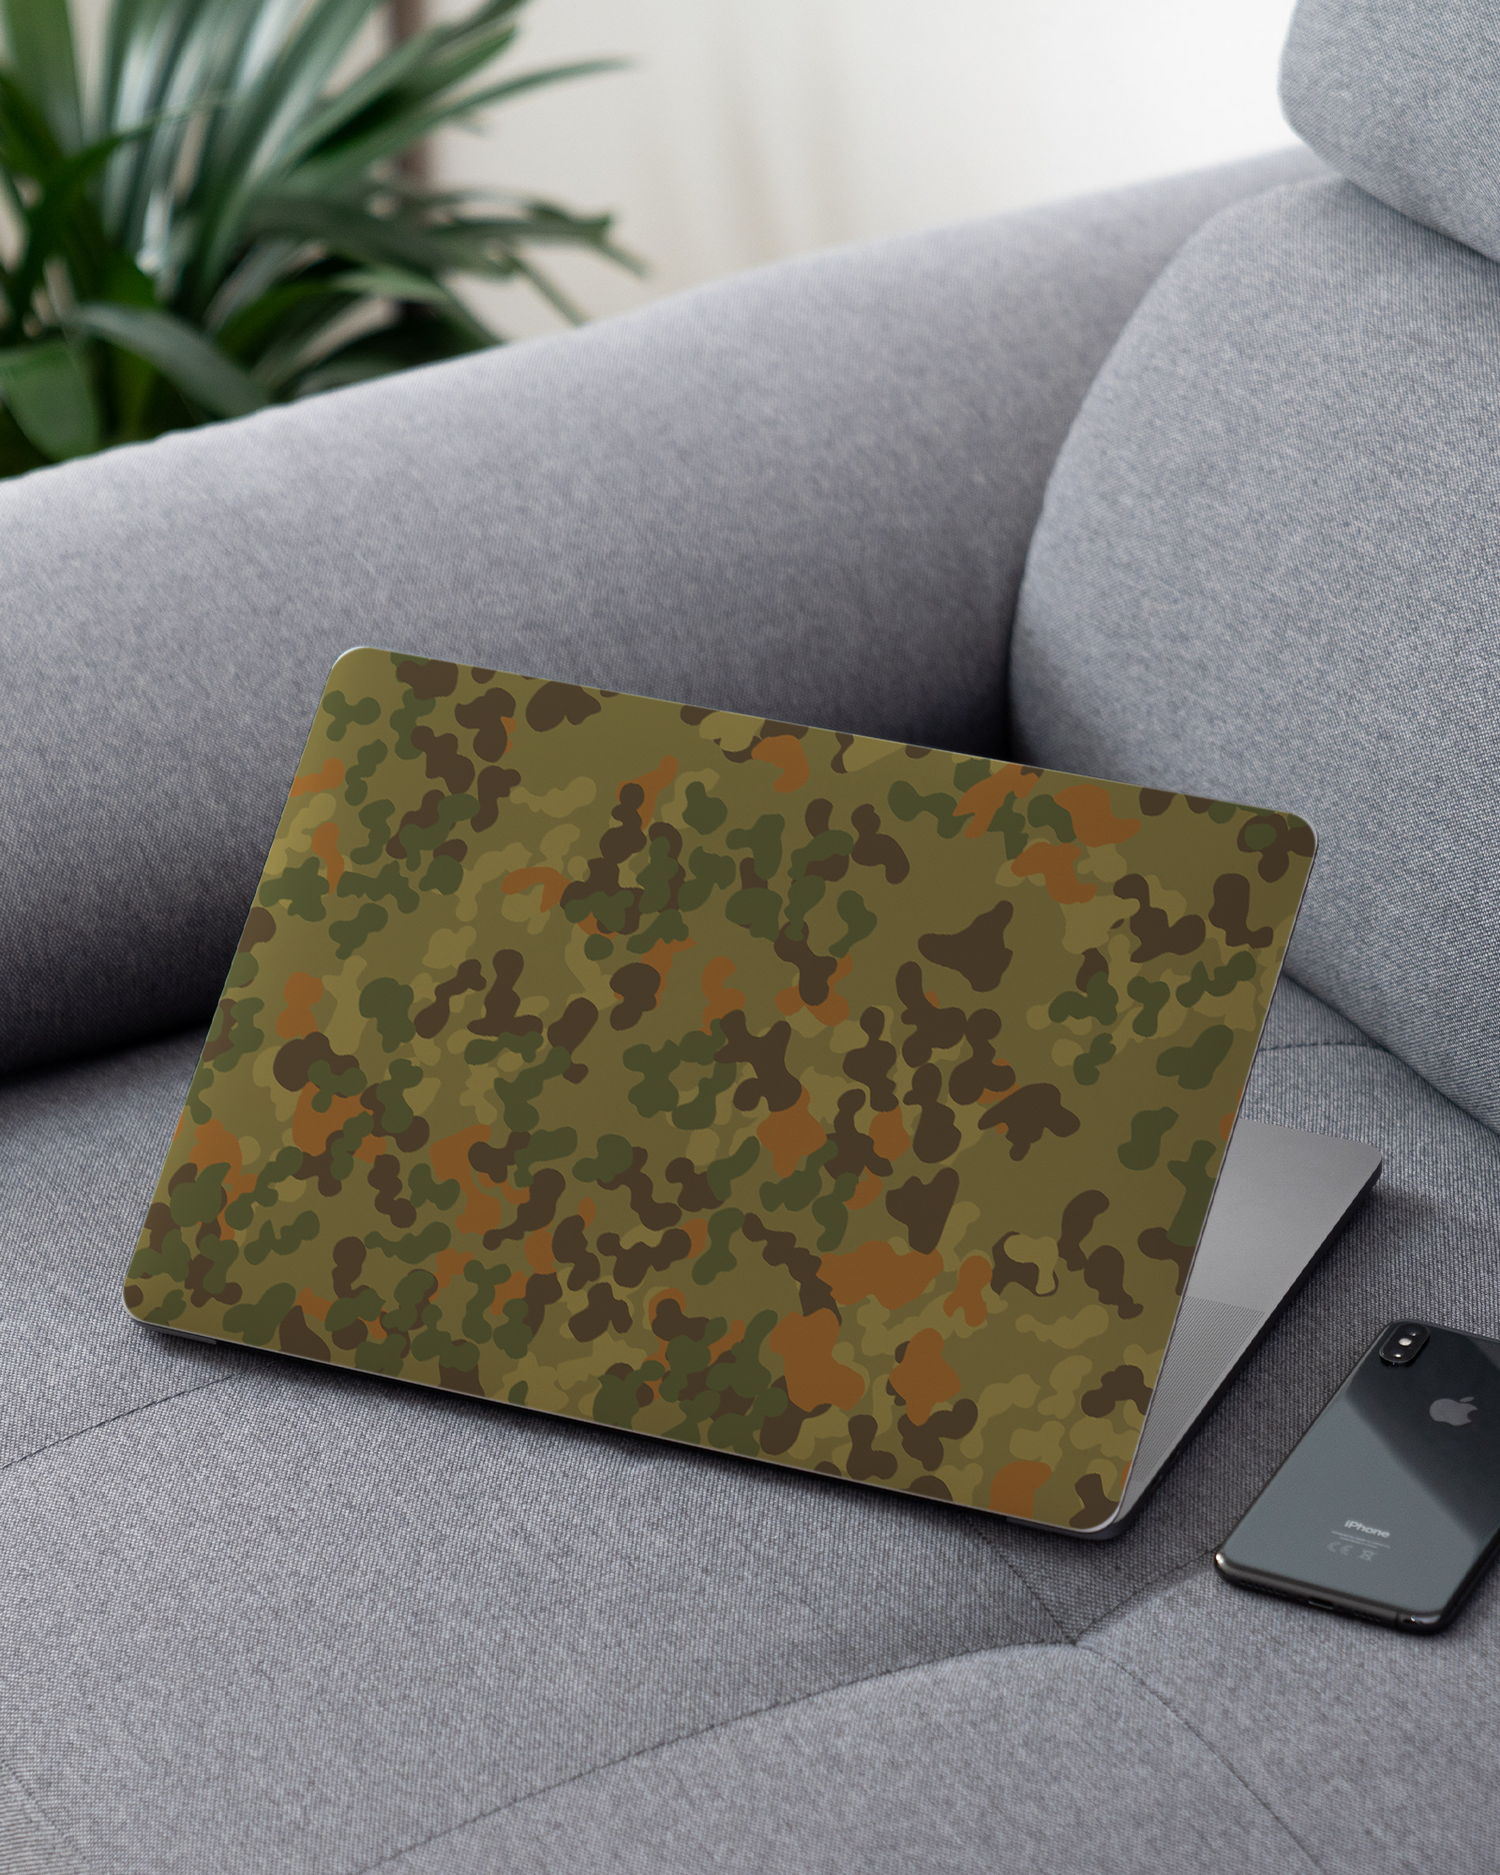 Spot Camo Laptop Skin for 13 inch Apple MacBooks on a couch